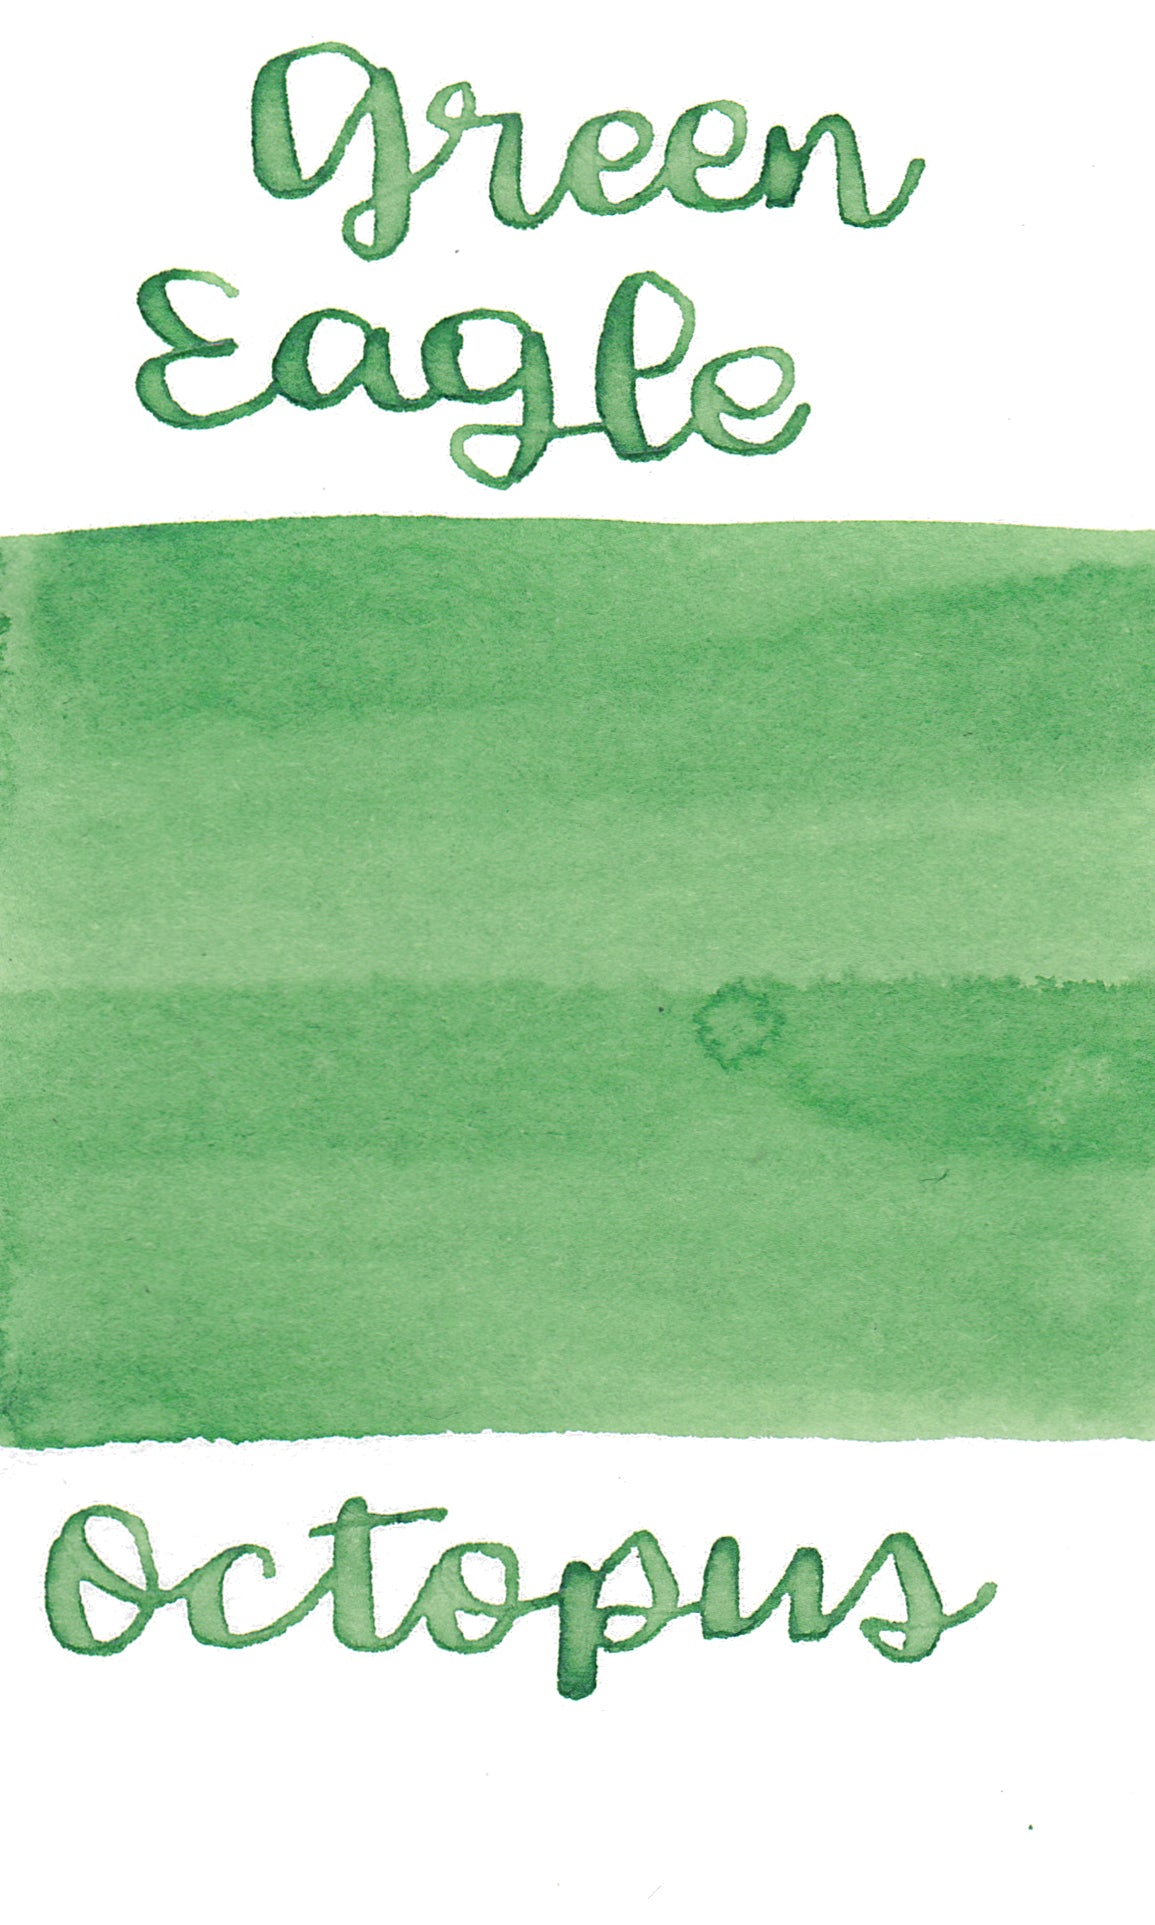 Octopus Write and Draw Ink 374 Green Eagle